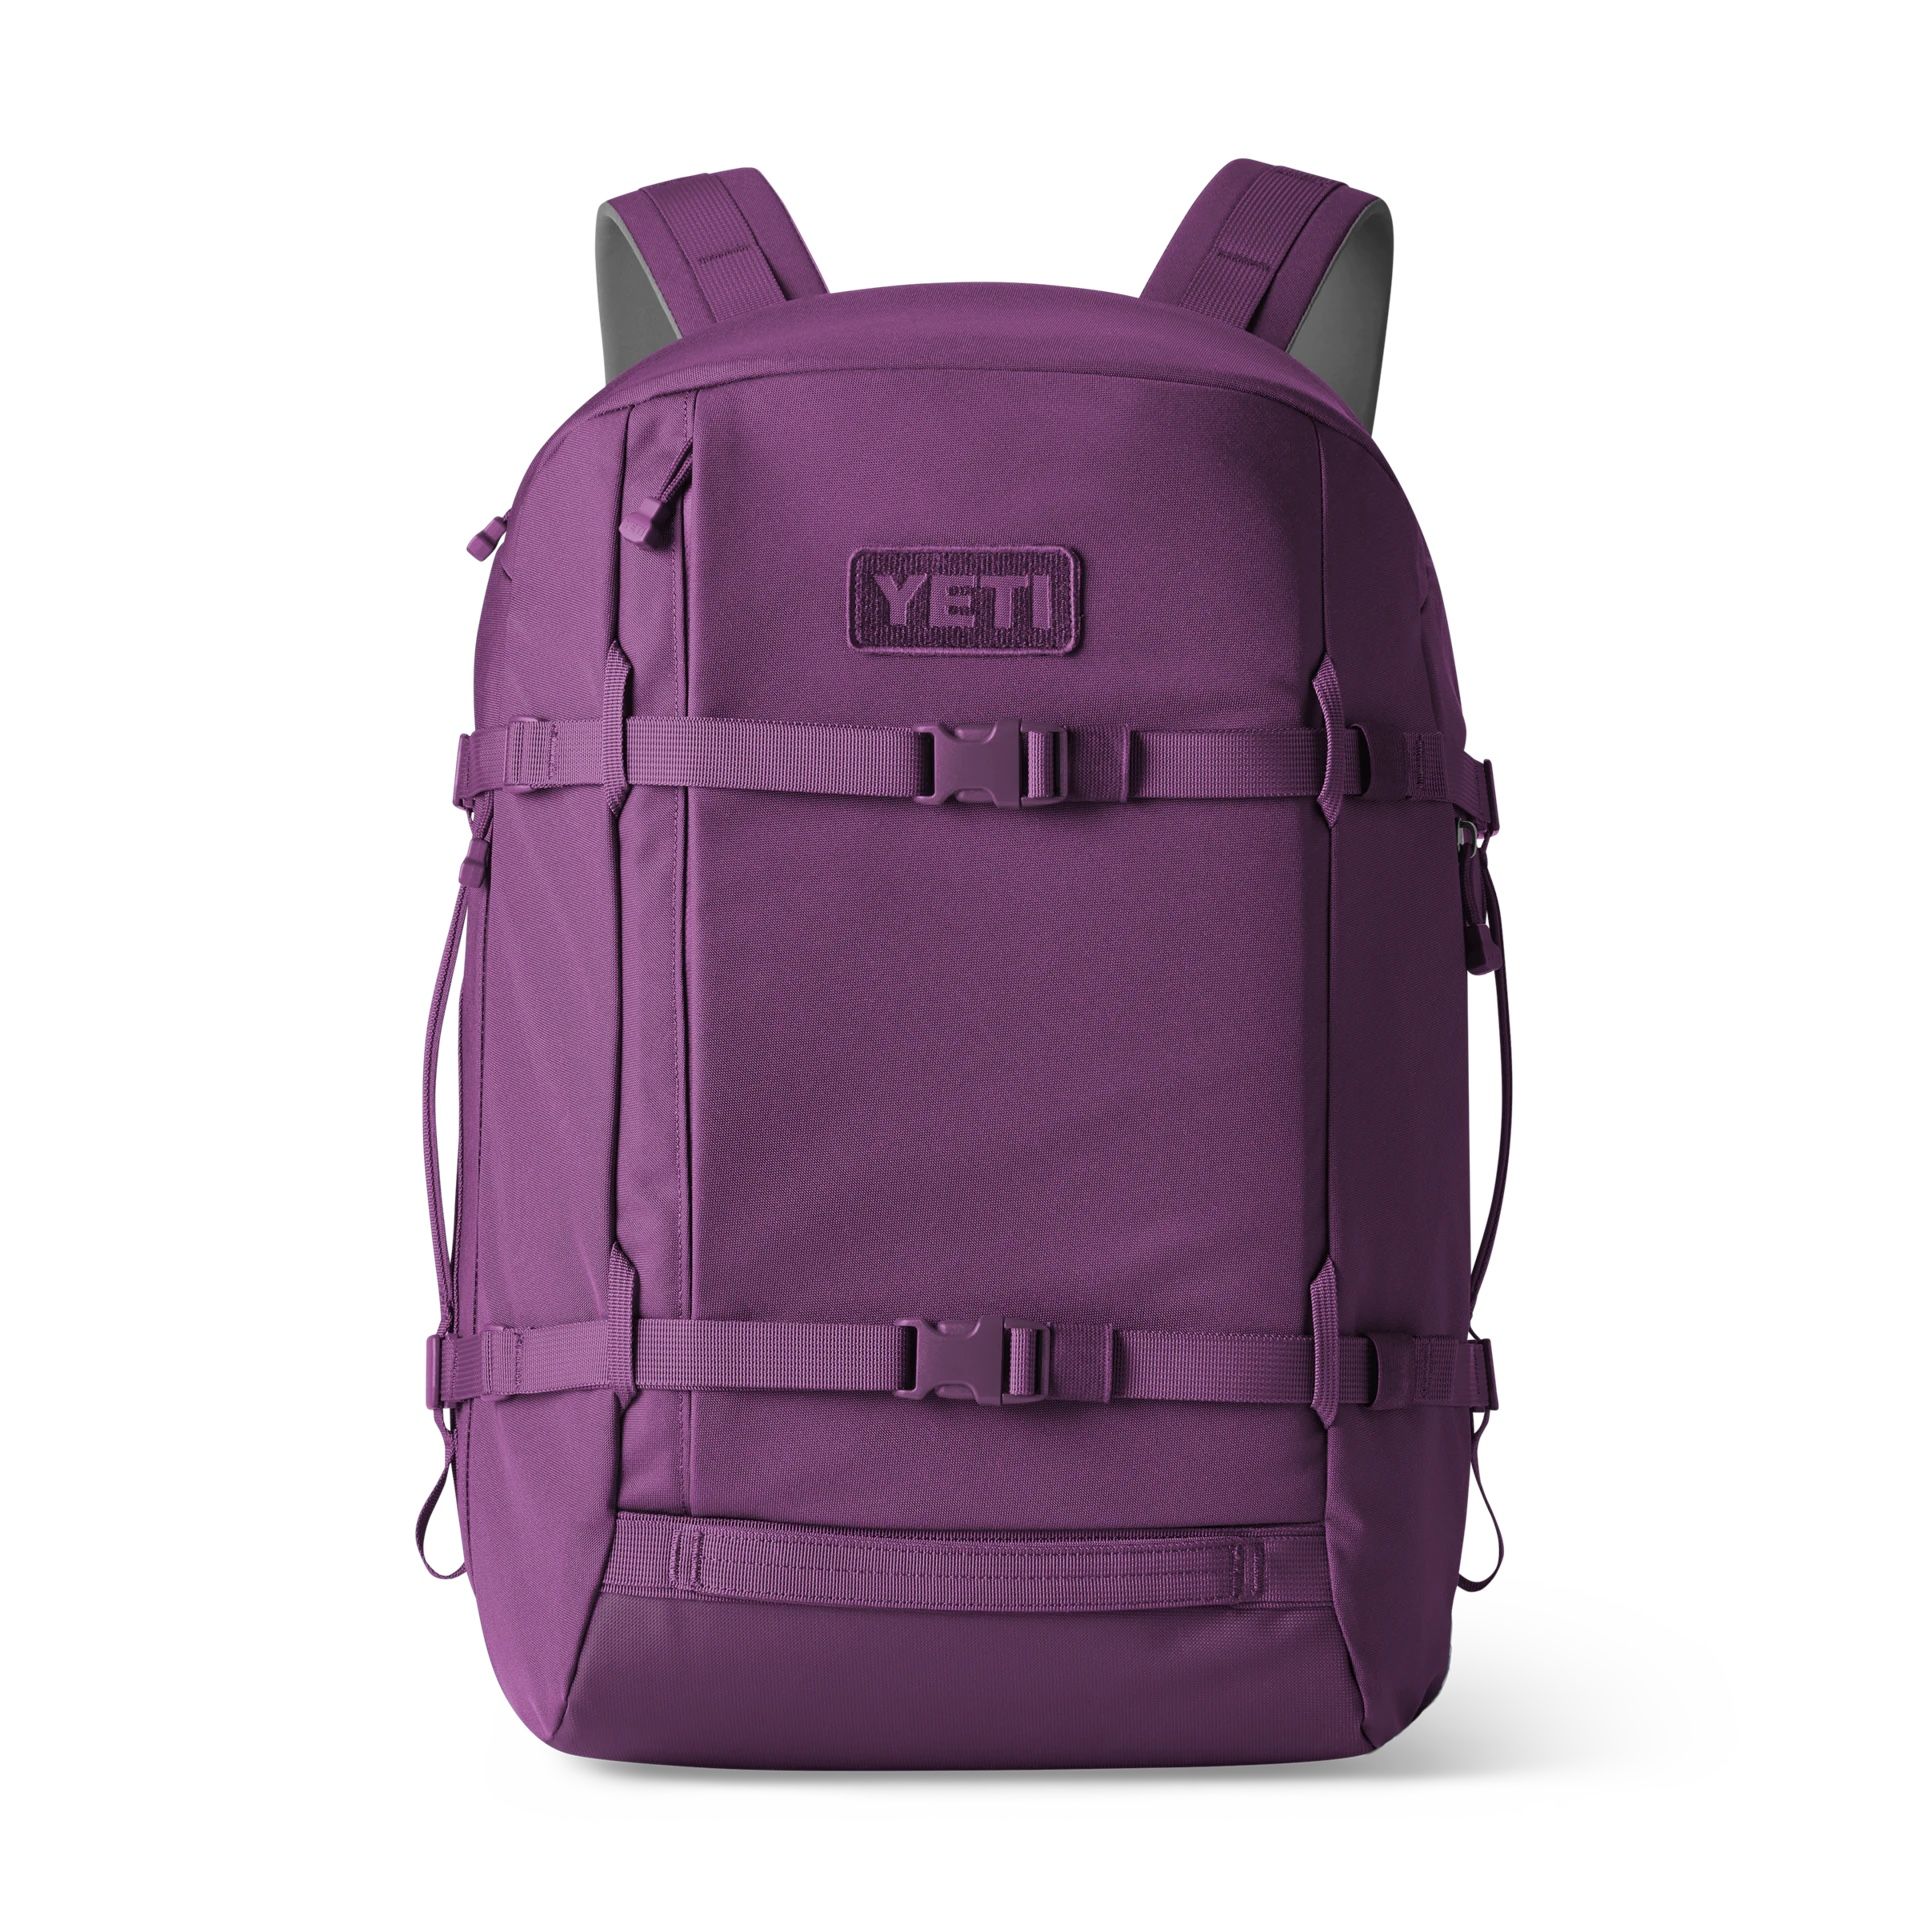 YETI Crossroads 35L Travel Backpack Bag BRAND NEW WITH BOX & TAGS  Nordic Purple